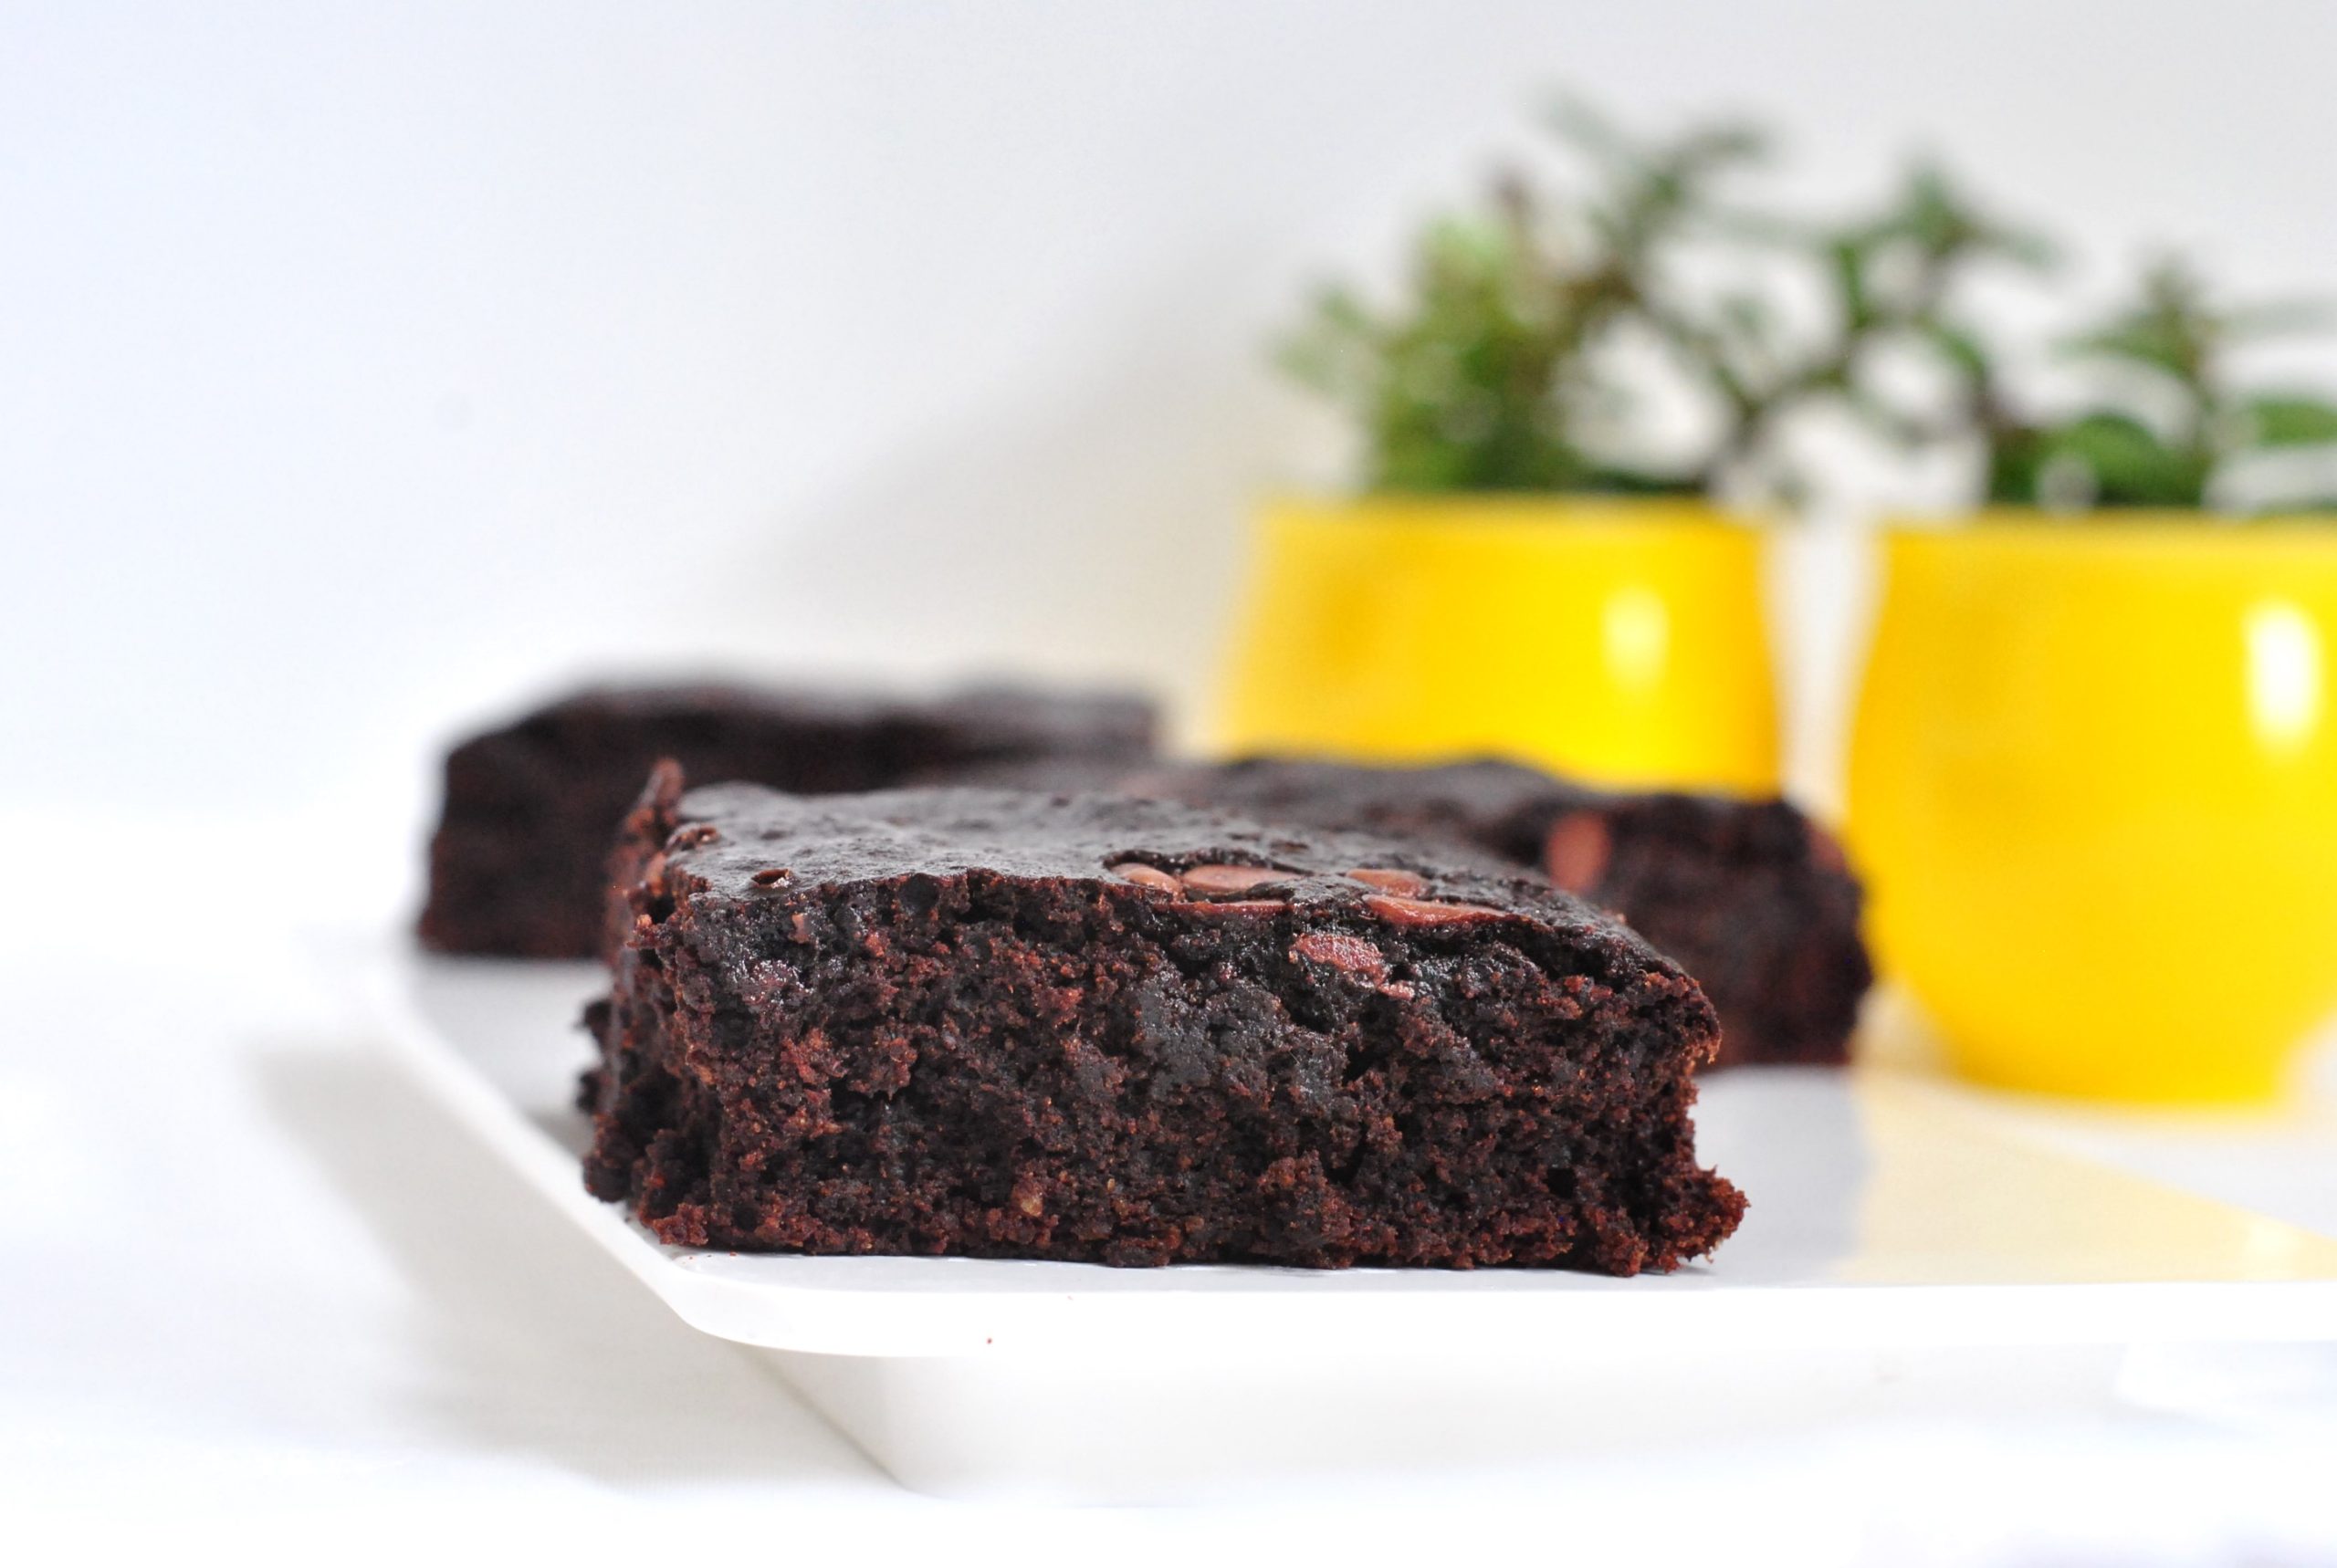 gluten-free, lactose-free, fat-free brownie